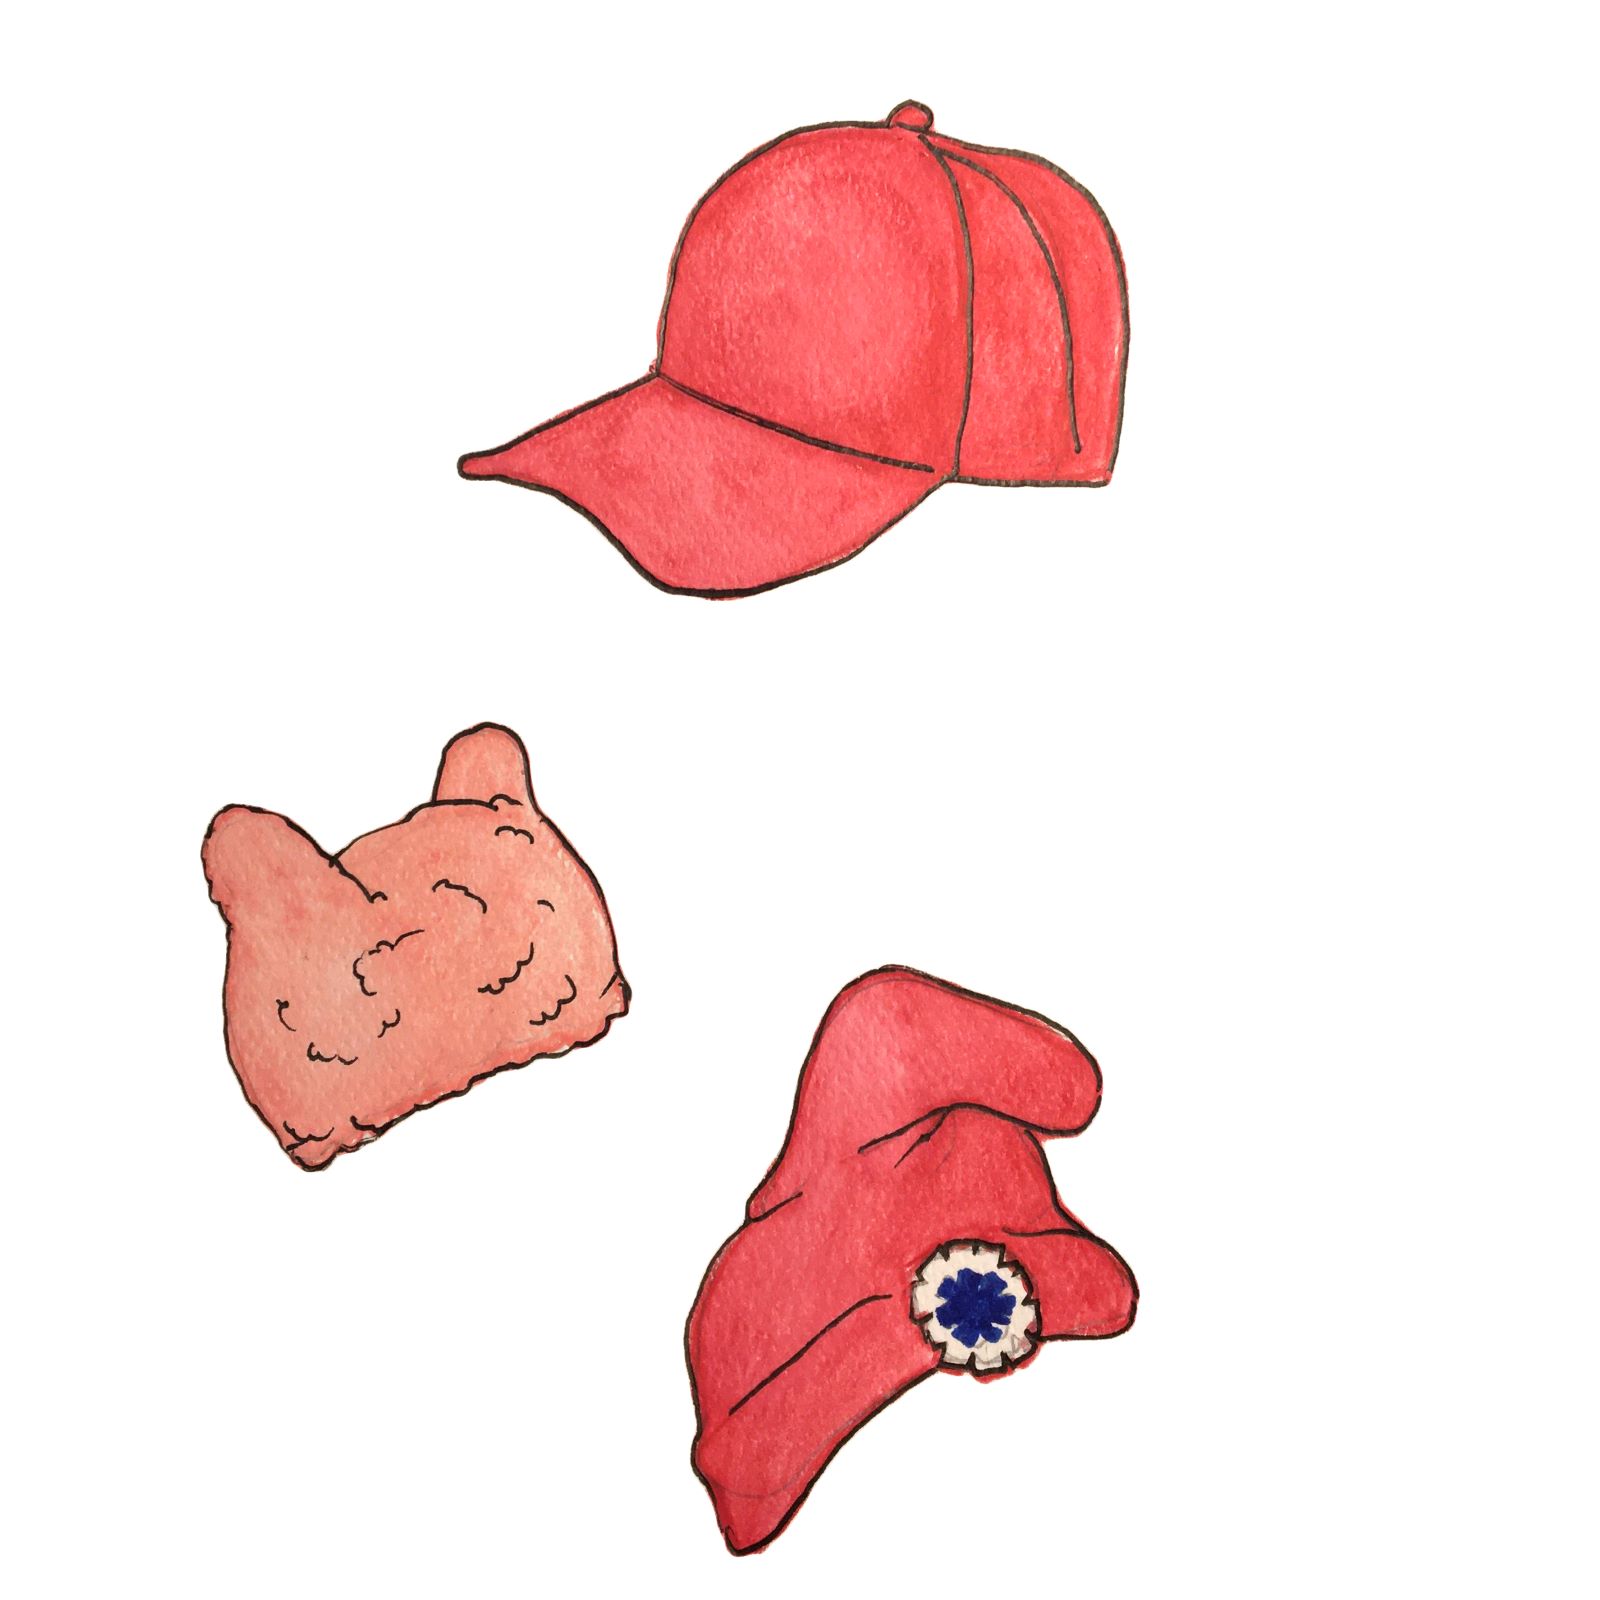 An illustrated trio of red and pink hats. Clockwise from top: a red baseball cap, a red Phyrgian hat and a pink ‘pussyhat’ popularized during the 2017 Women’s March.